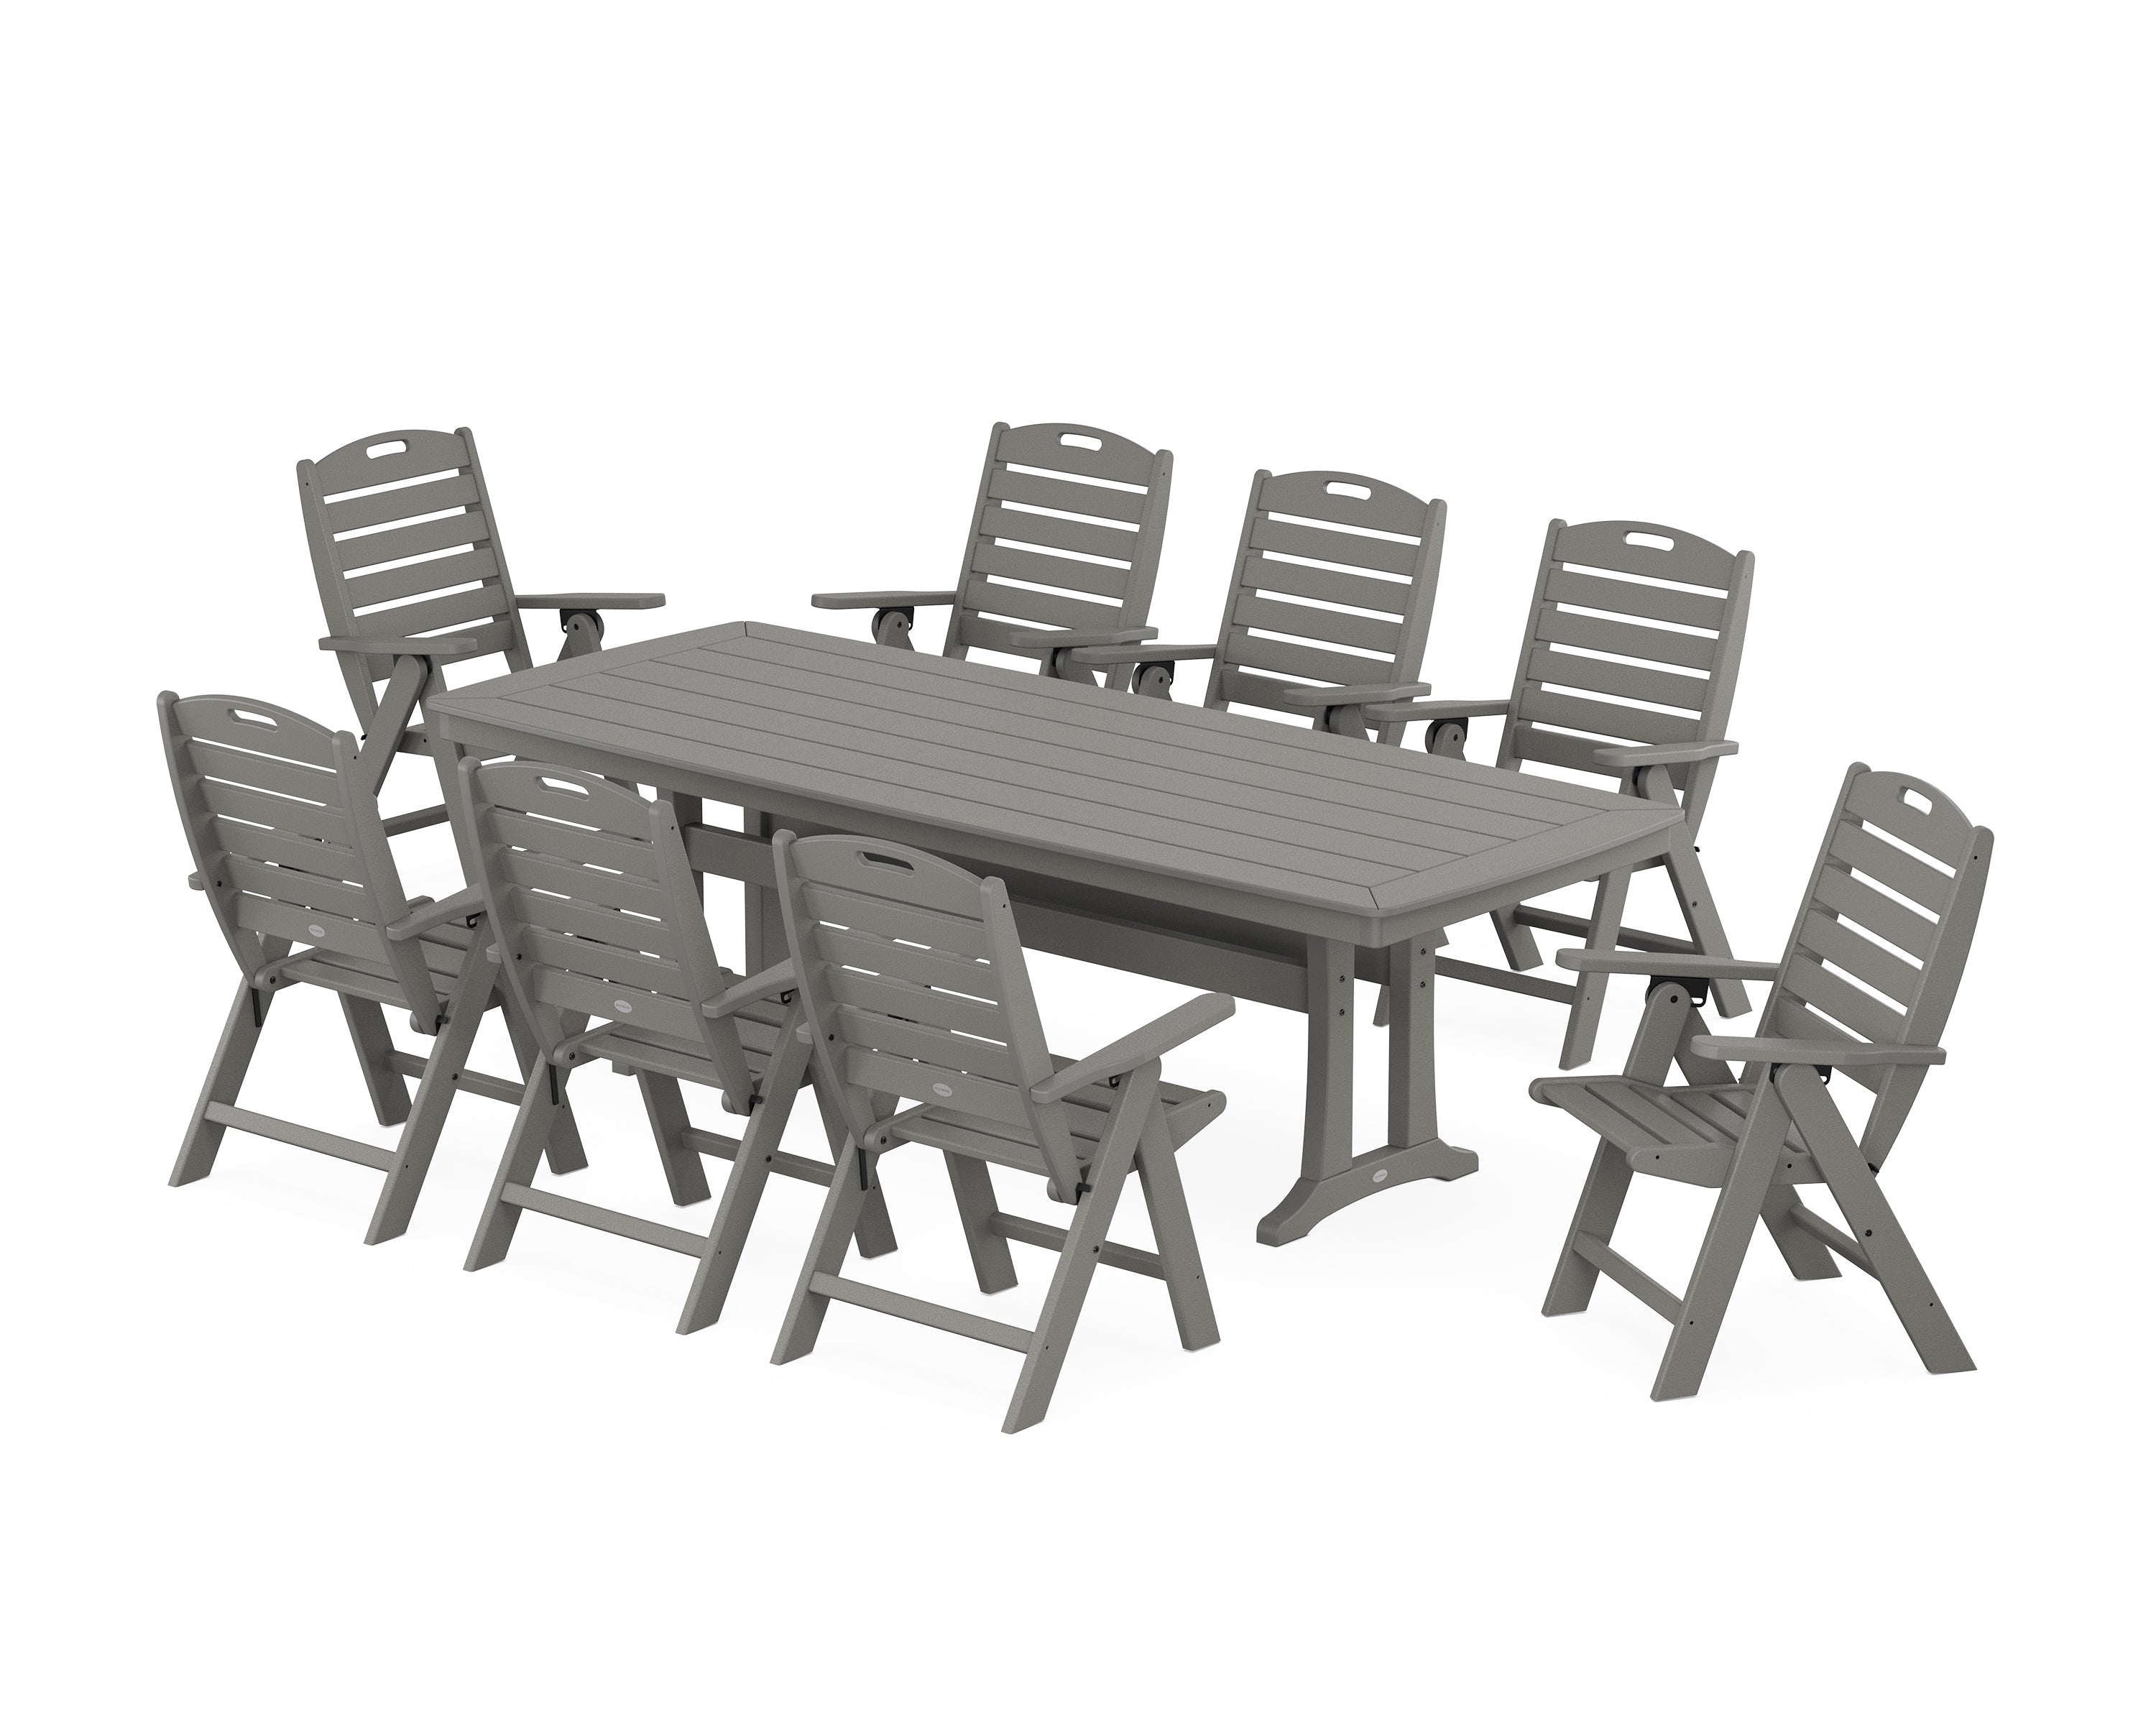 POLYWOOD® Nautical Highback 9-Piece Dining Set with Trestle Legs in Slate Grey